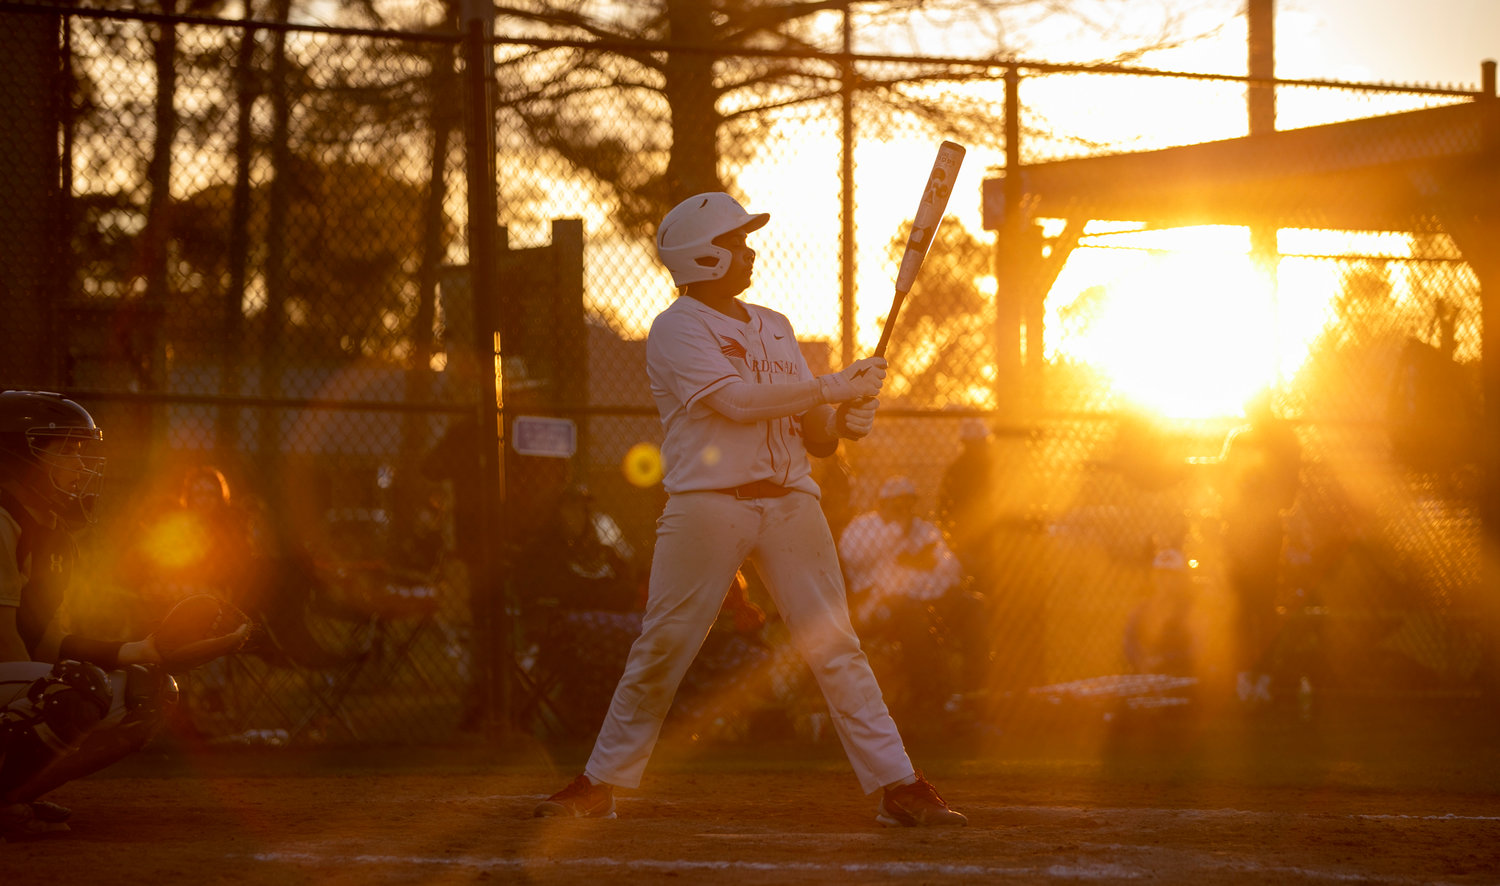 St. Michael freshman Noah Mosley prepares for an at-bat during the Cardinals’ Gulf Coast Classic game against Tennessee’s Giles County Bobcats at Johnnie Simms Park in Gulf Shores Wednesday, March 15. The golden-hour contest wrapped up St. Michael’s action in the first of three weeks’ worth of tournaments hosted in Baldwin County.